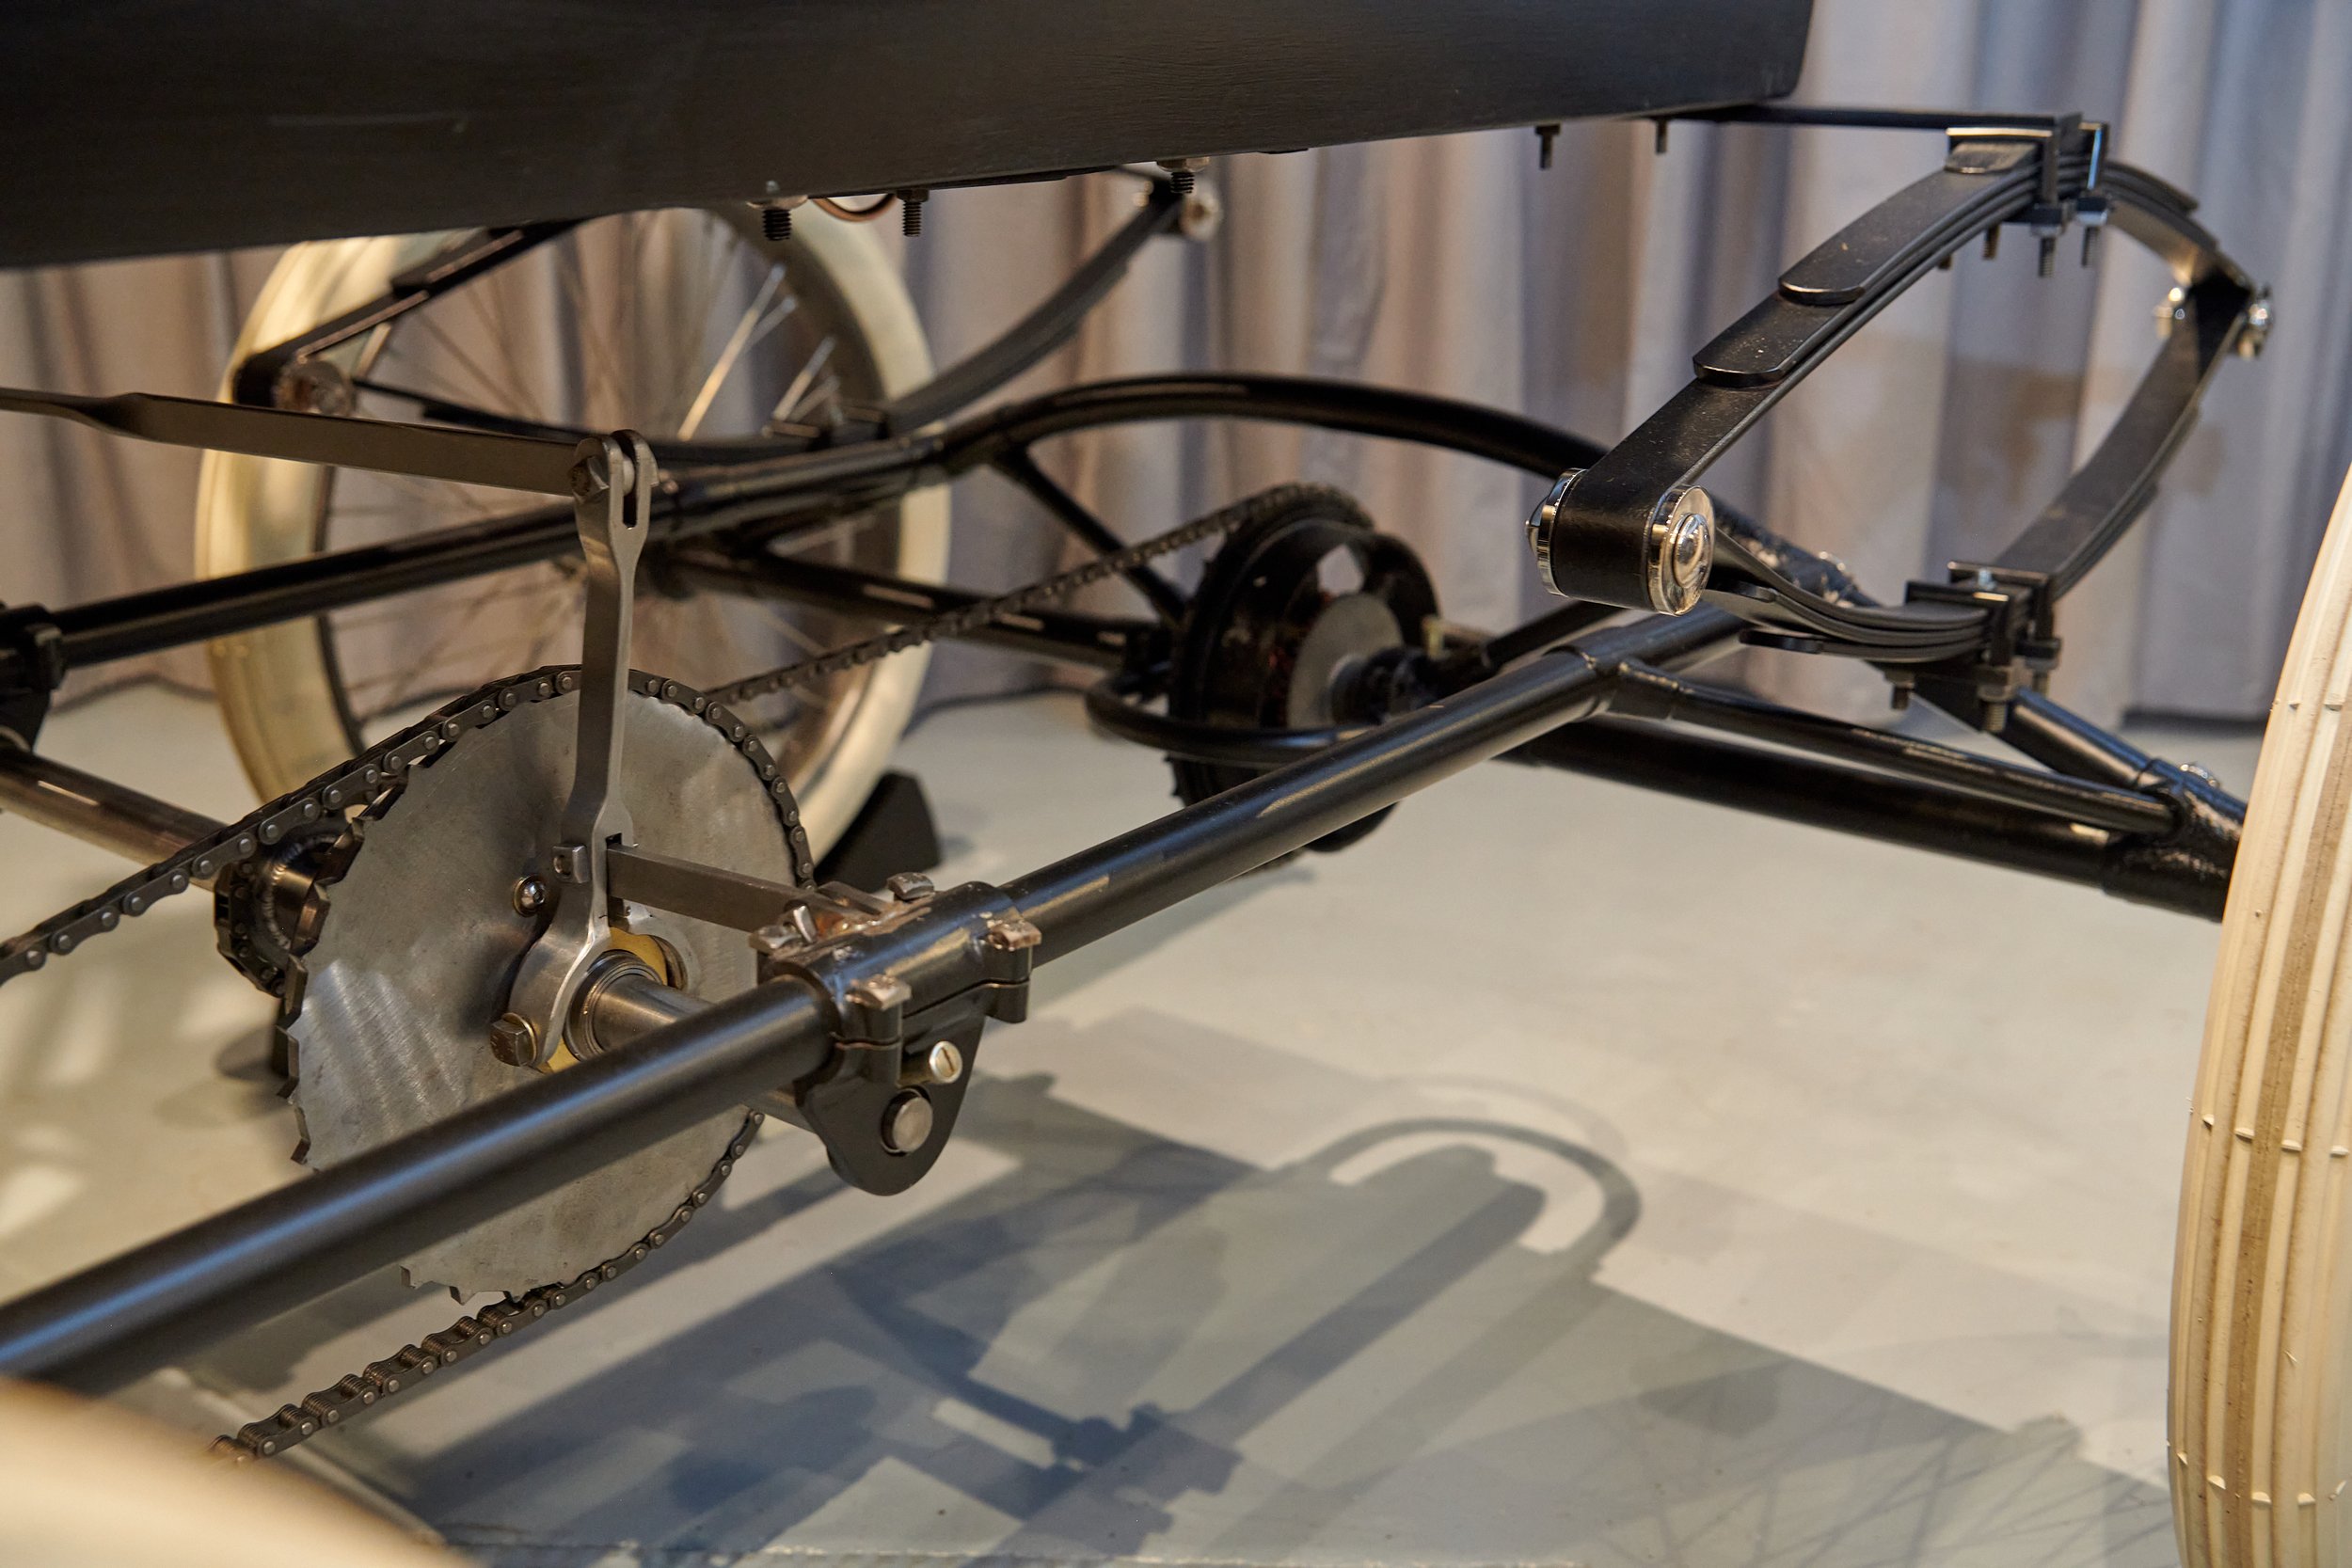  The replica’s rear-wheel chain drive. George Foote Foss frequently recalled how unreliable and difficult to use the original vehicle’s transmission was. 